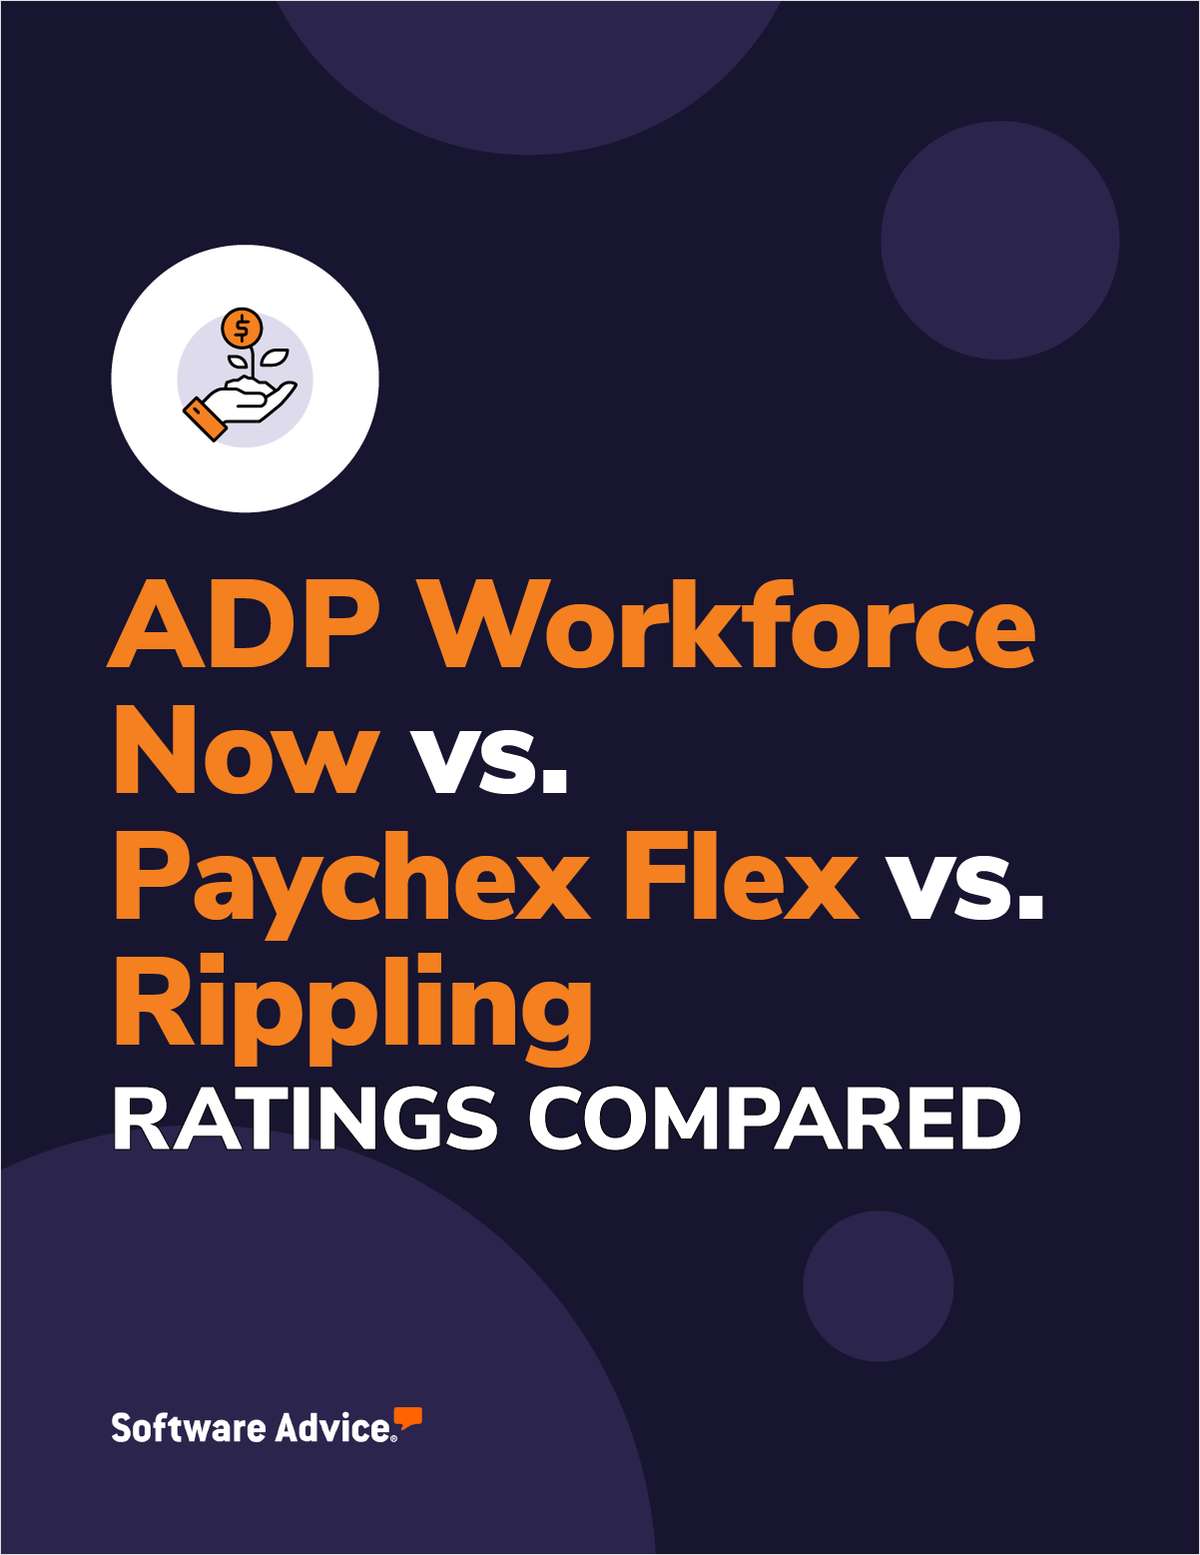 w sofg3883c8 - ADP Workforce Now vs. Paychex Flex vs. Rippling Ratings Compared